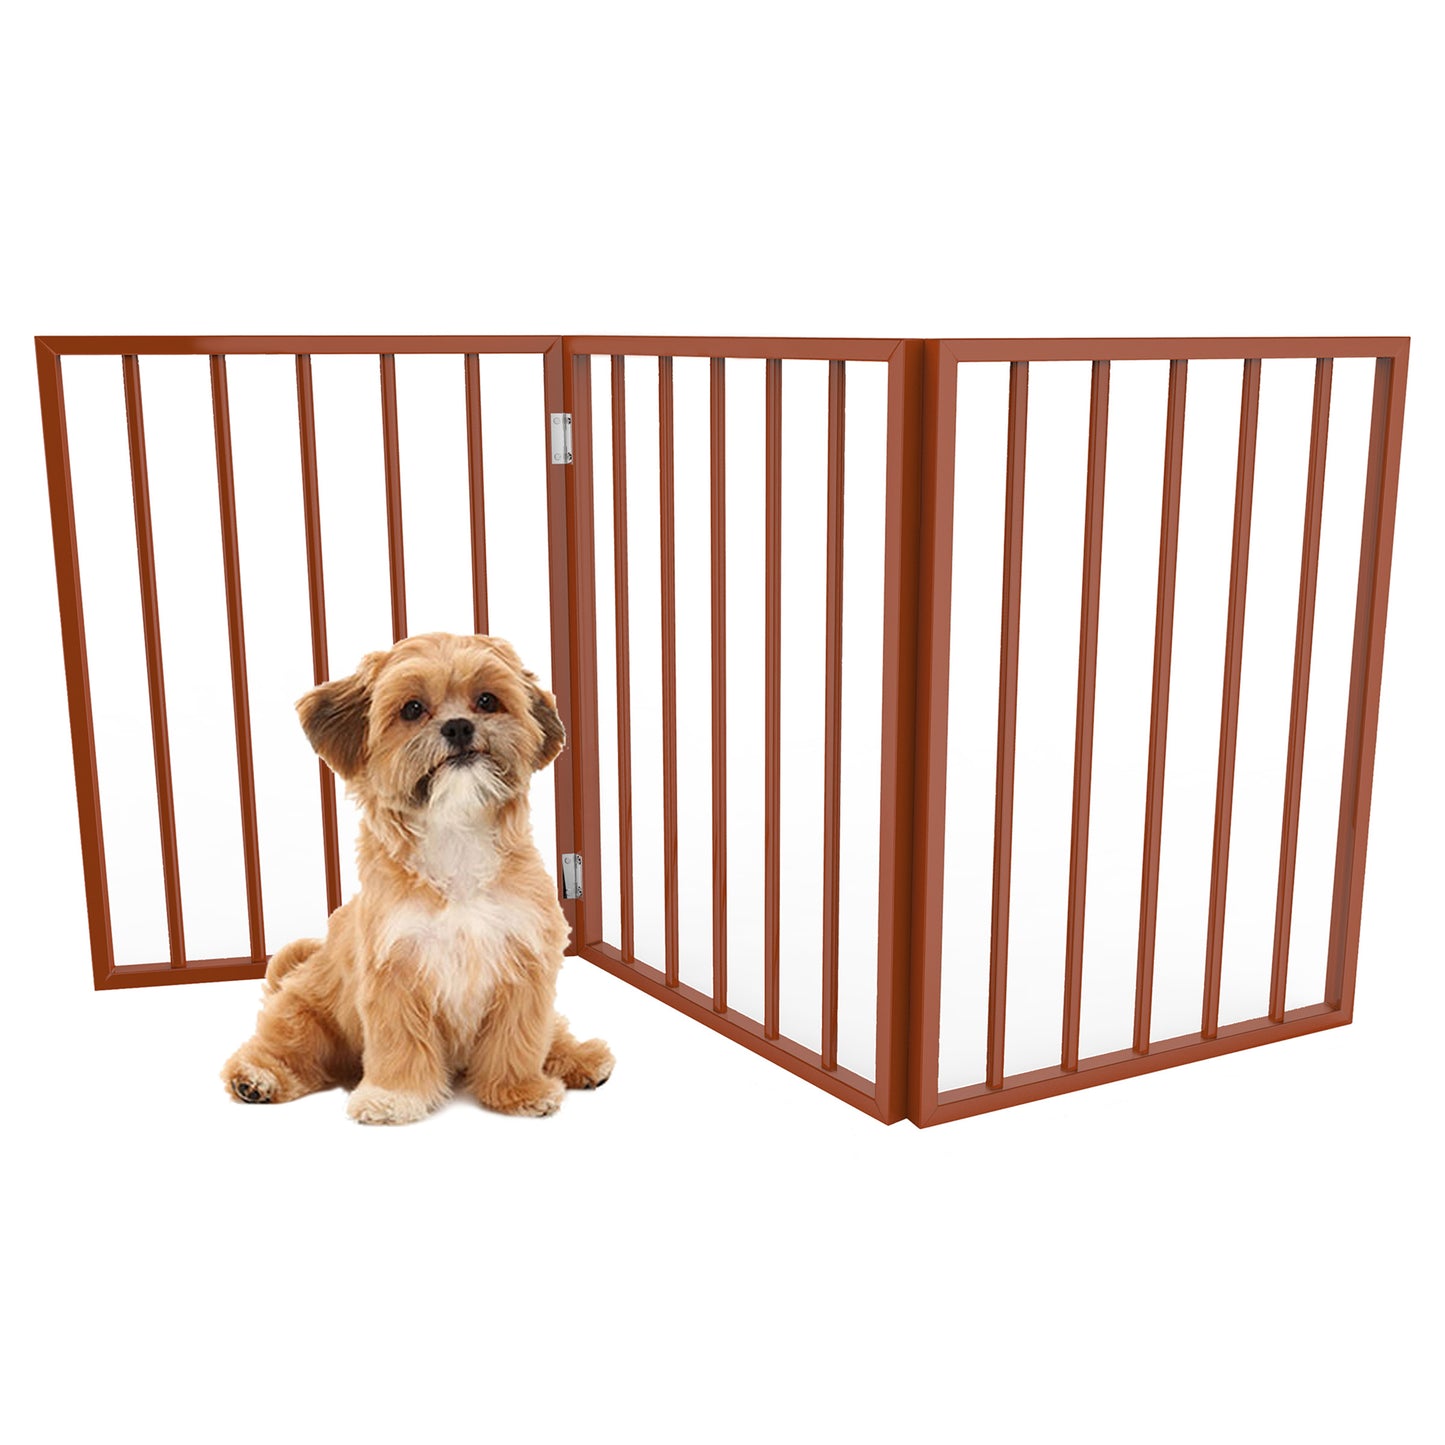 Maltipo dog sits obediently outside of a red pet fence, awaiting affection from the dog owner.